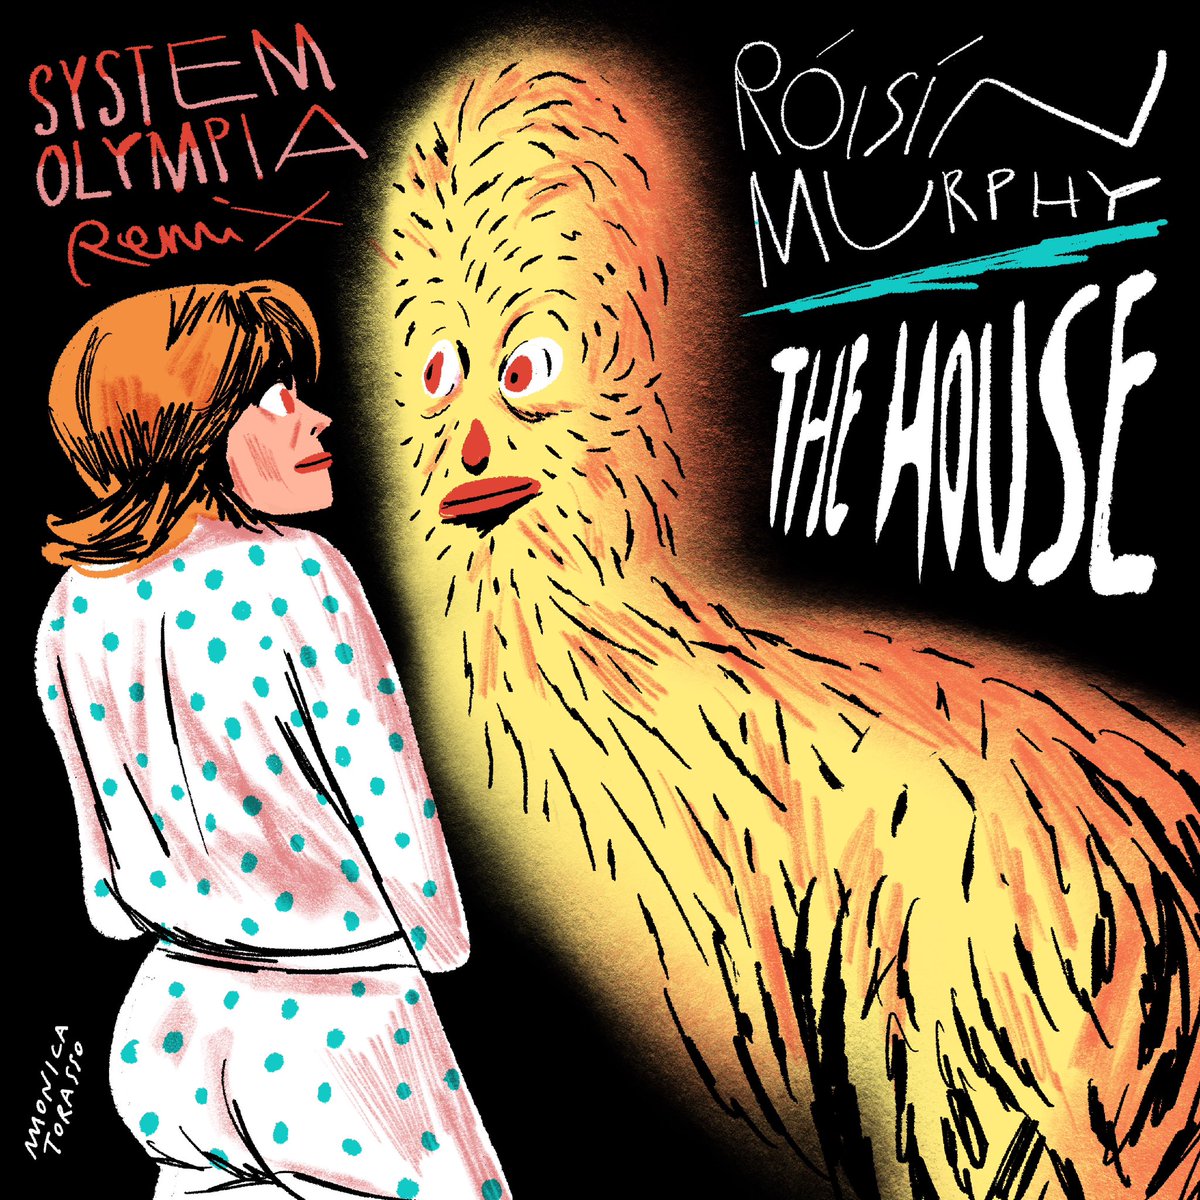 THE SYSTEM OLYMPIA REMIX of ‘The House’ Is OUT NOW - available on all platforms ✔️ 🔥HOT HIT PARADE REMIX PACKAGE INCOMING ON THE 24th OF MAY. Presave 🔗 beacons.ai/roisinmurphy